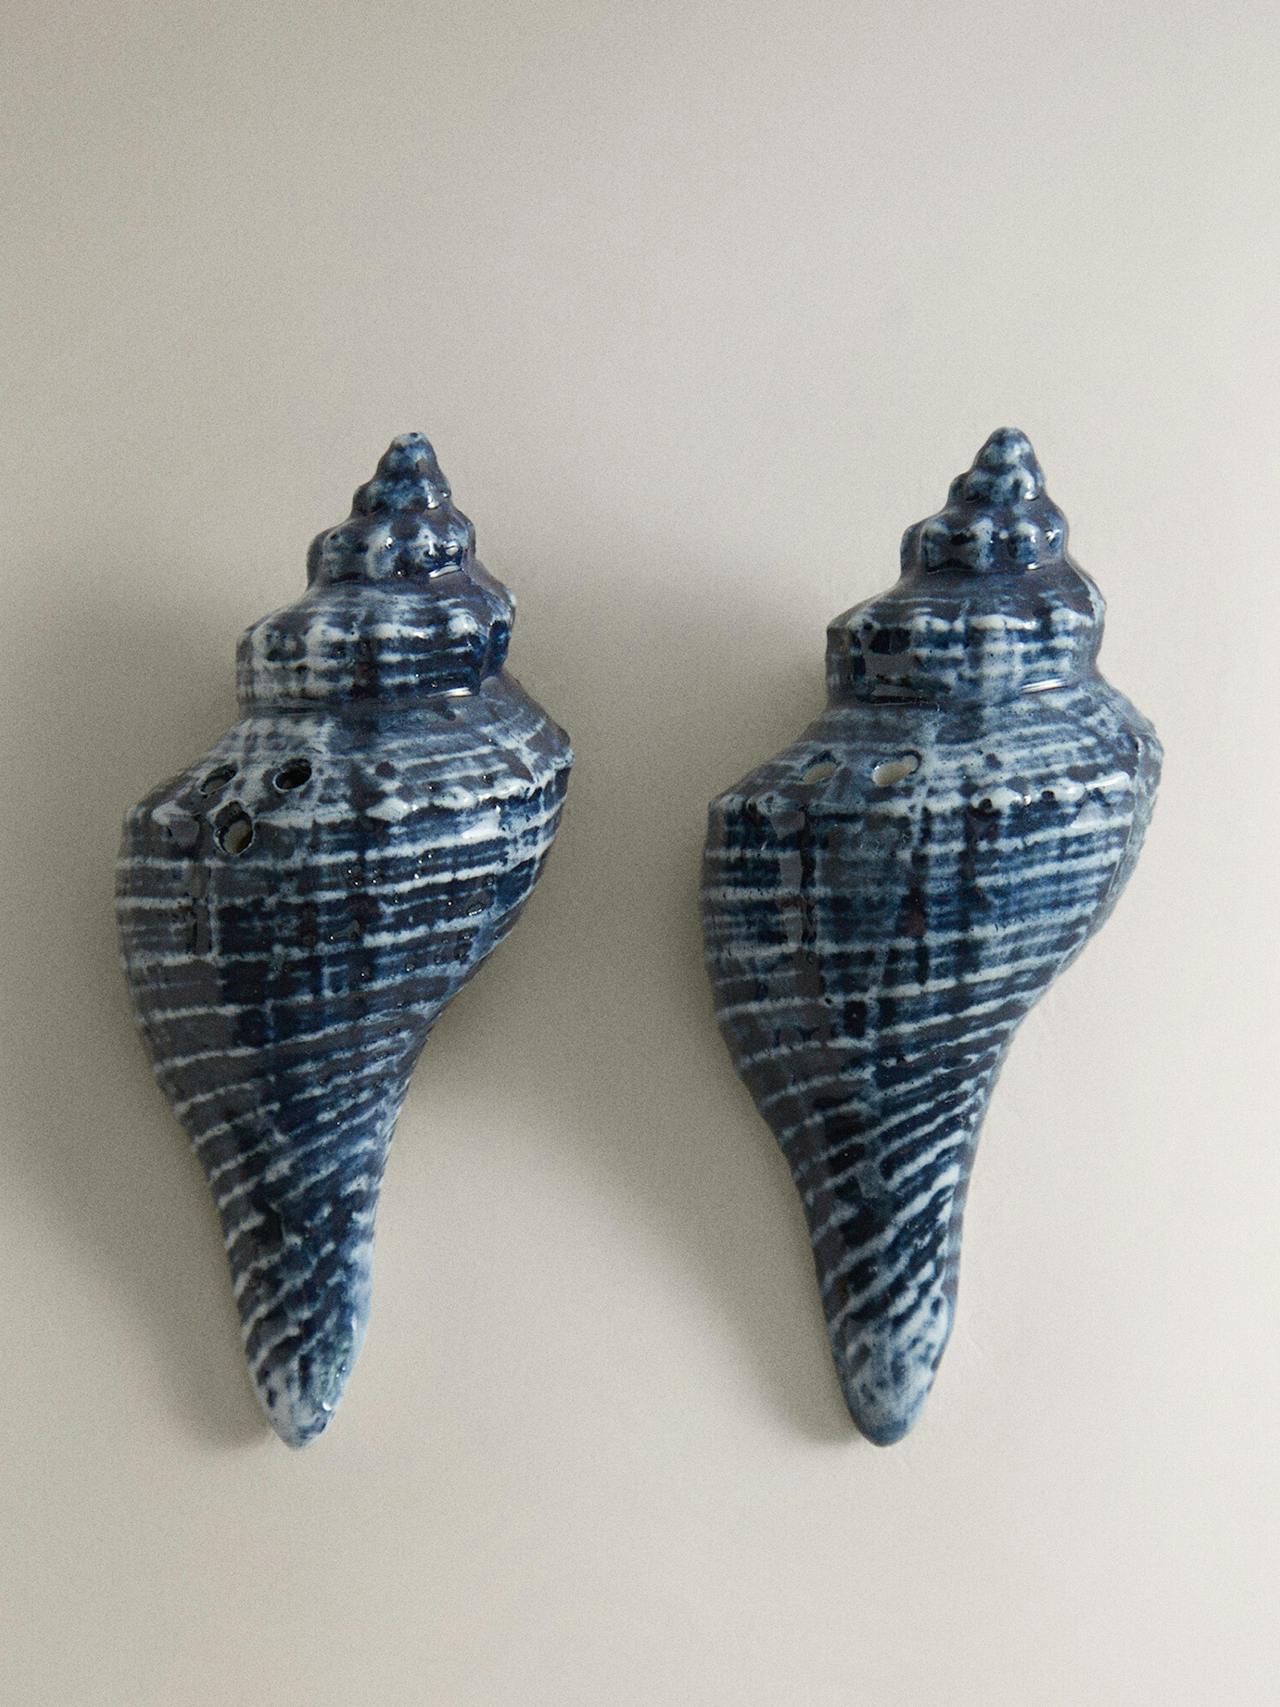 Conch shell salt and pepper shakers (set of 2)